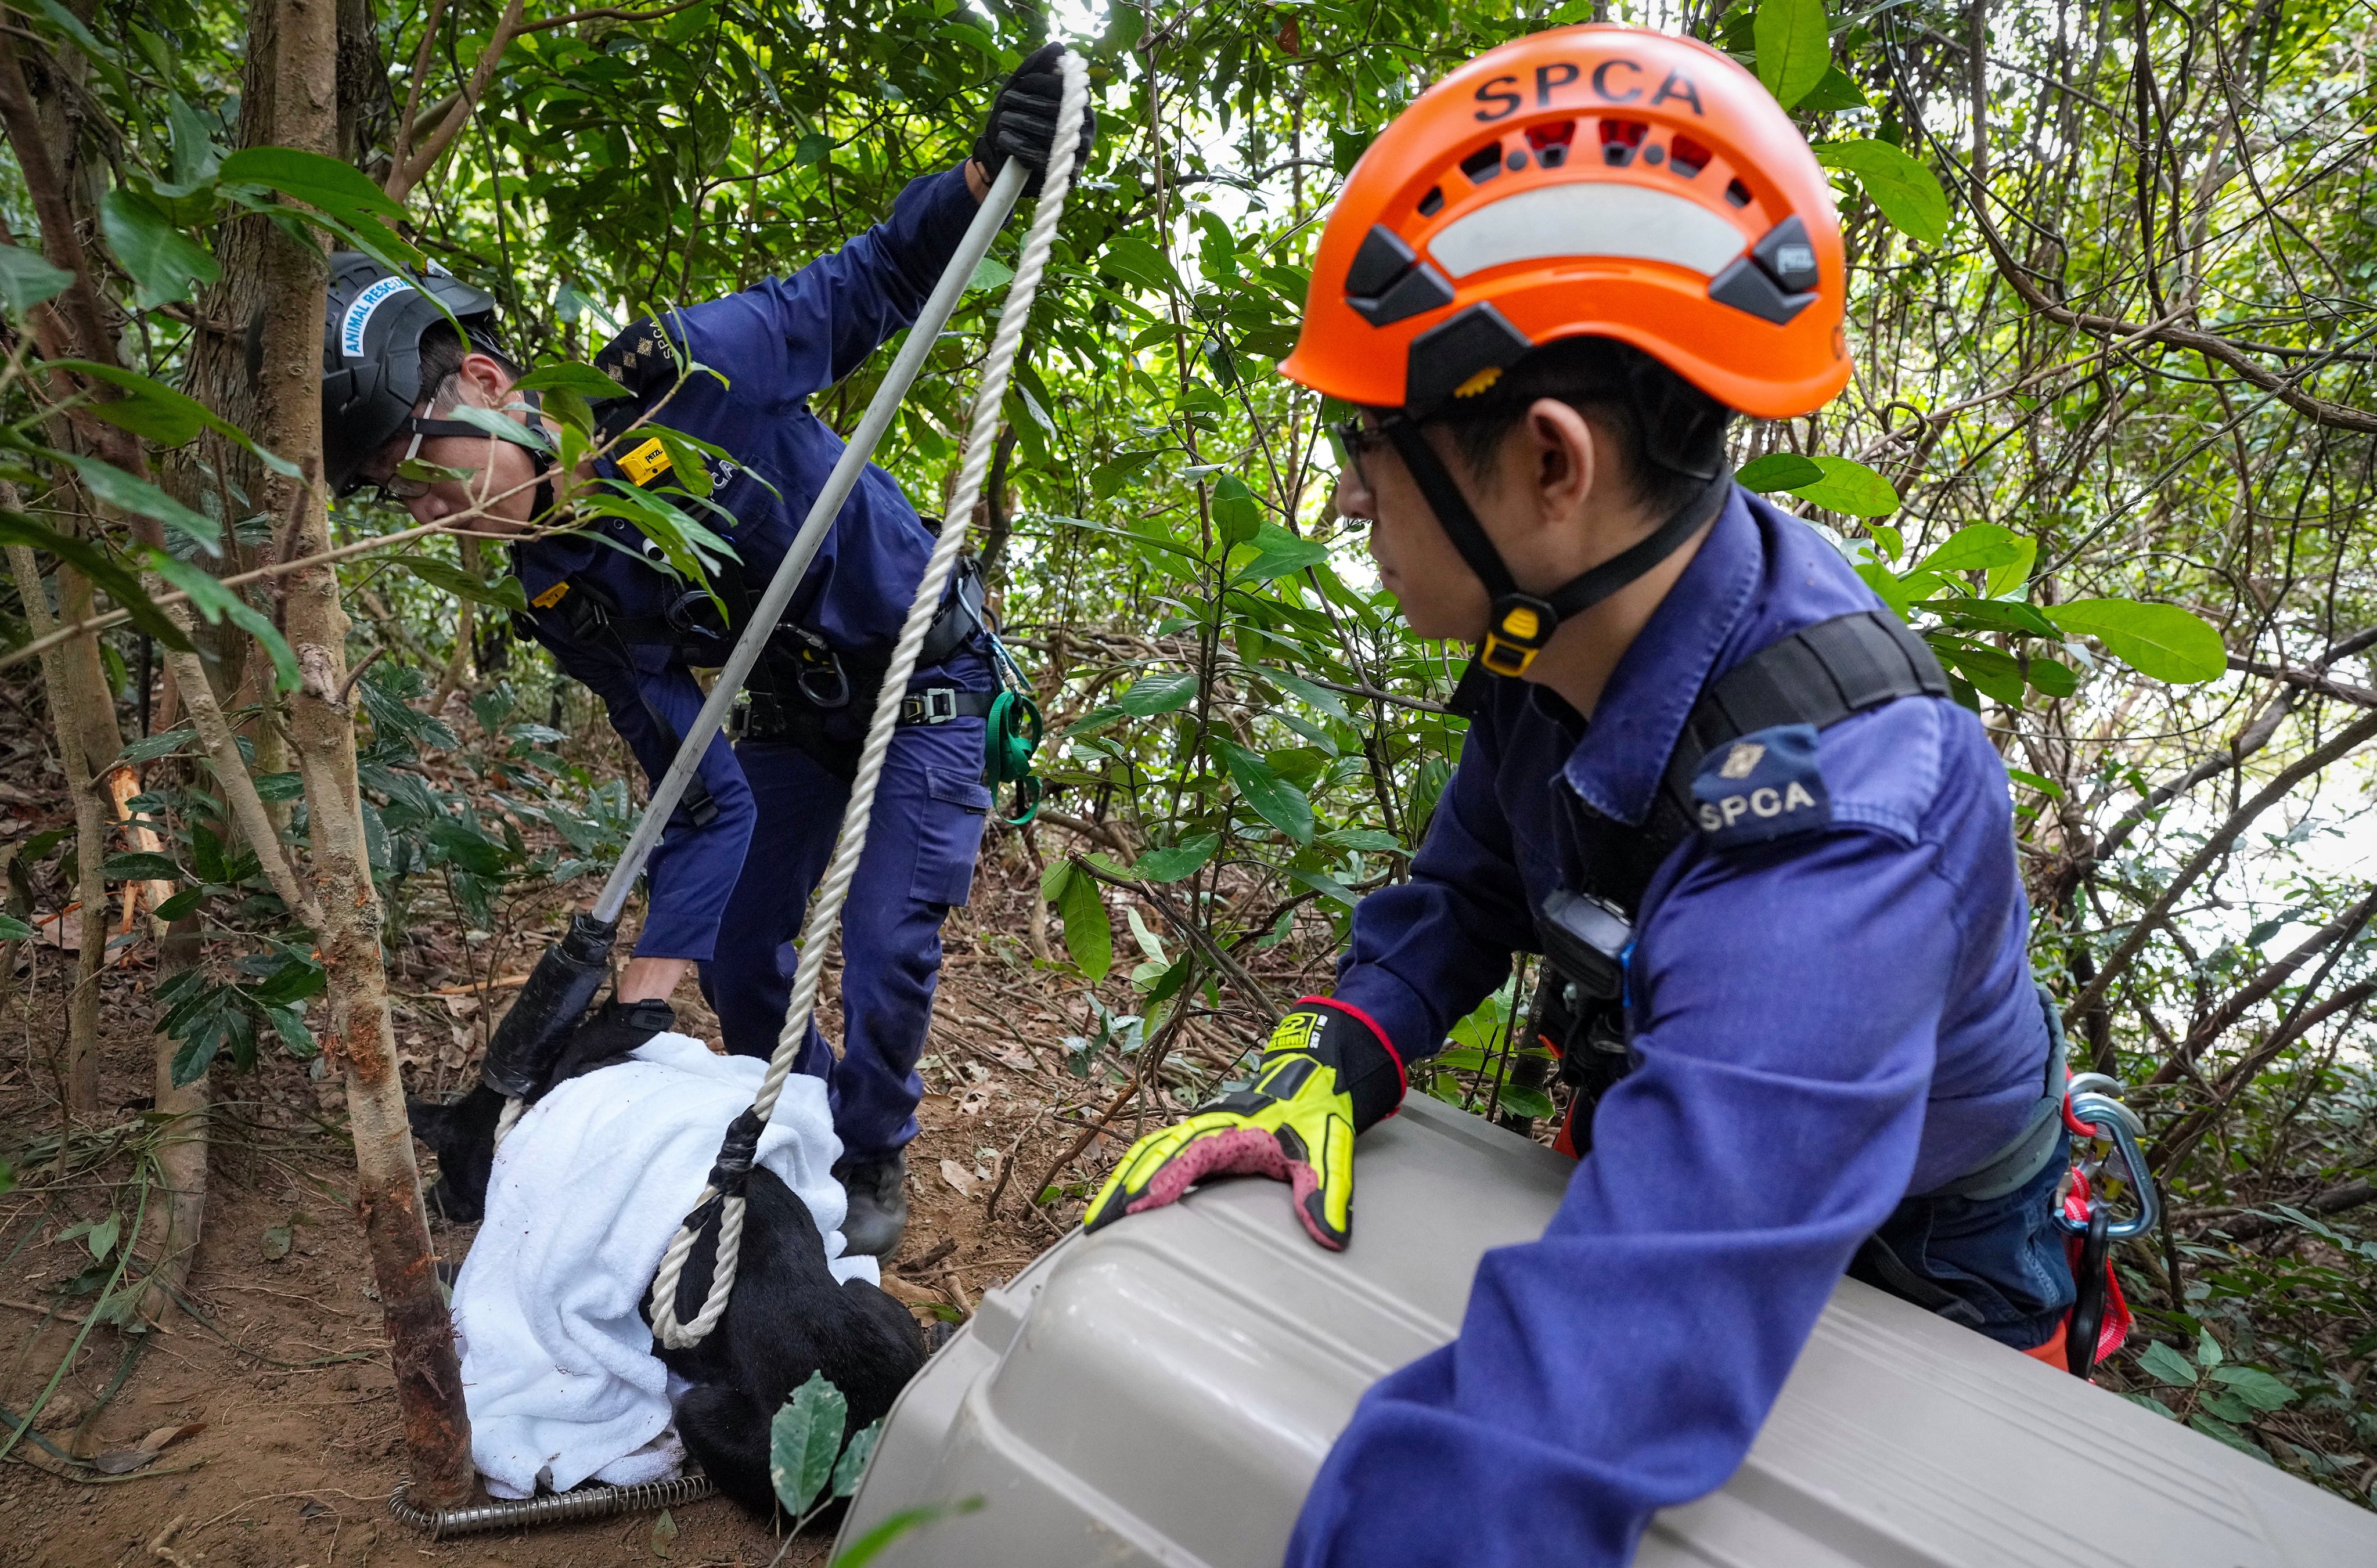 An SPCA rescue team helps free a dog caught in an illegal animal trap on the slope of Shing Mun Reservoir. Photo: Elson Li